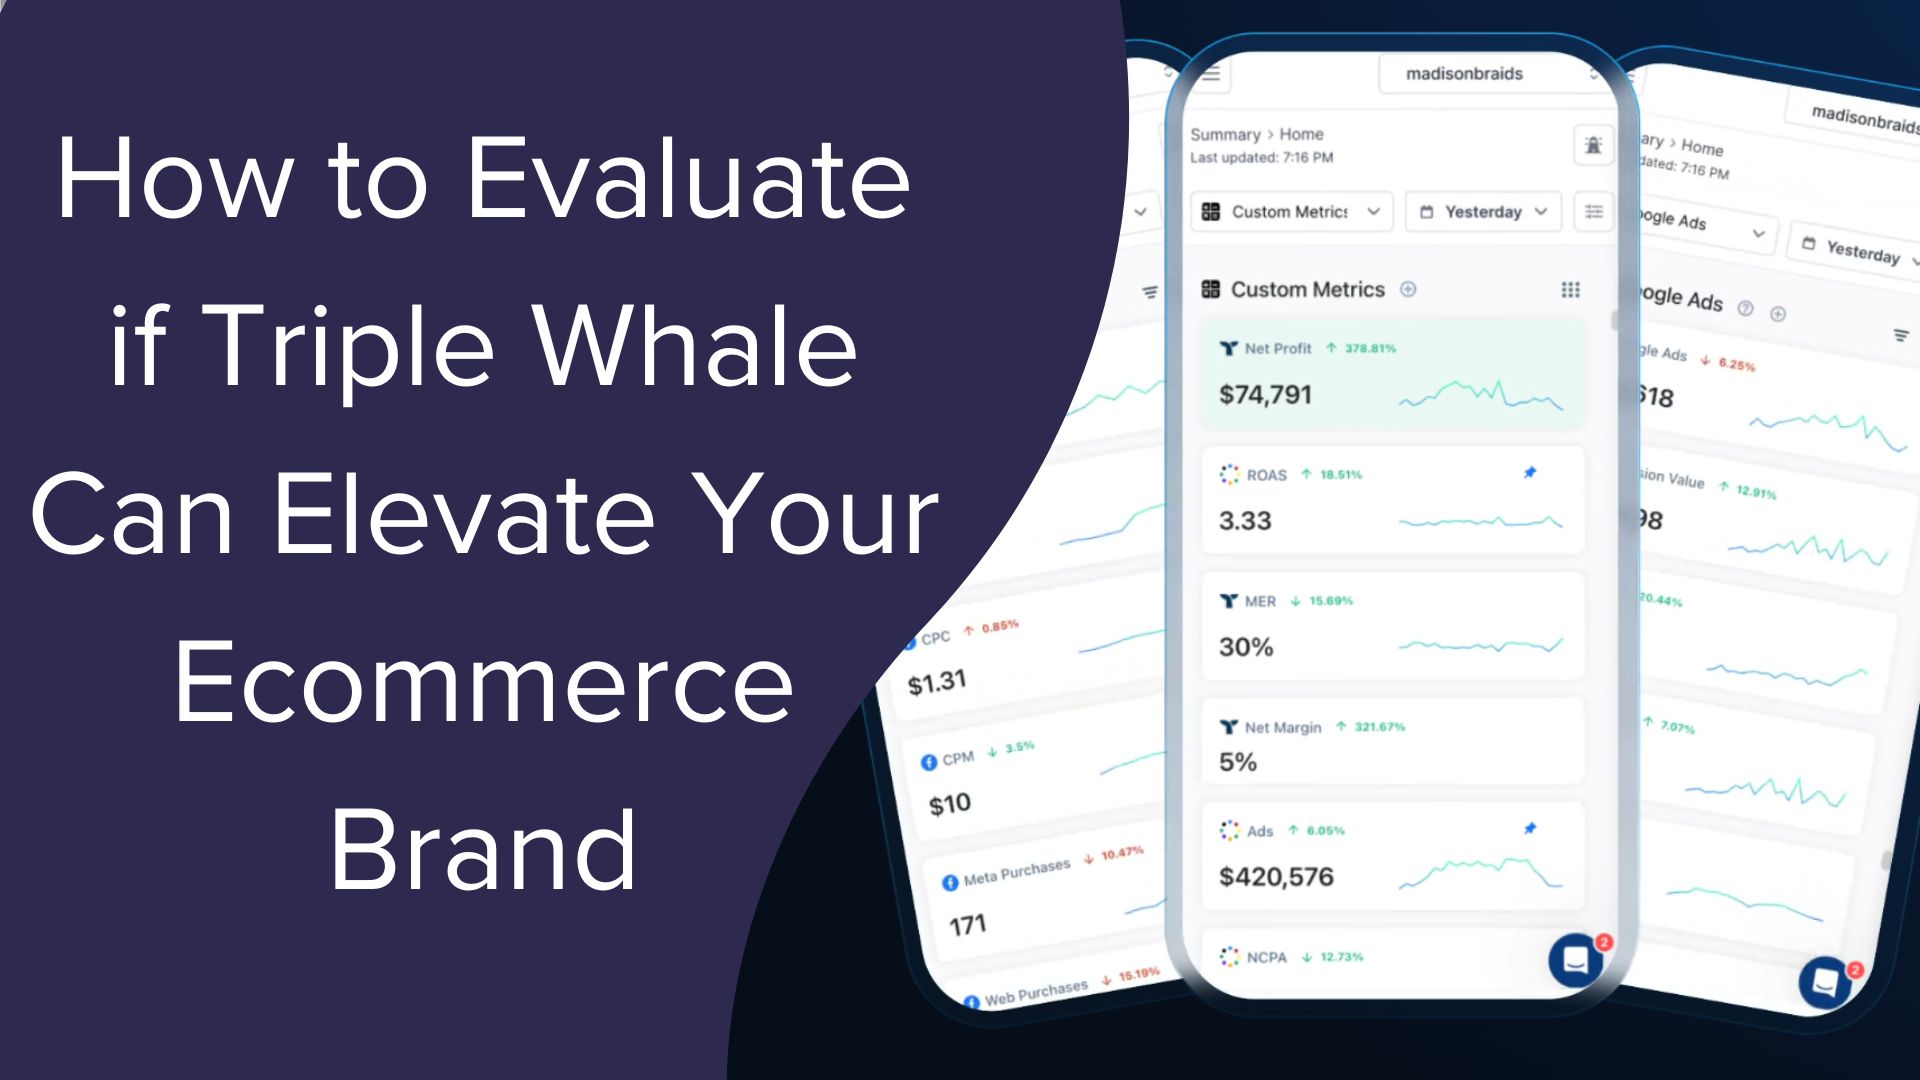 How to Evaluate if Triple Whale Can Elevate Your Ecommerce Brand